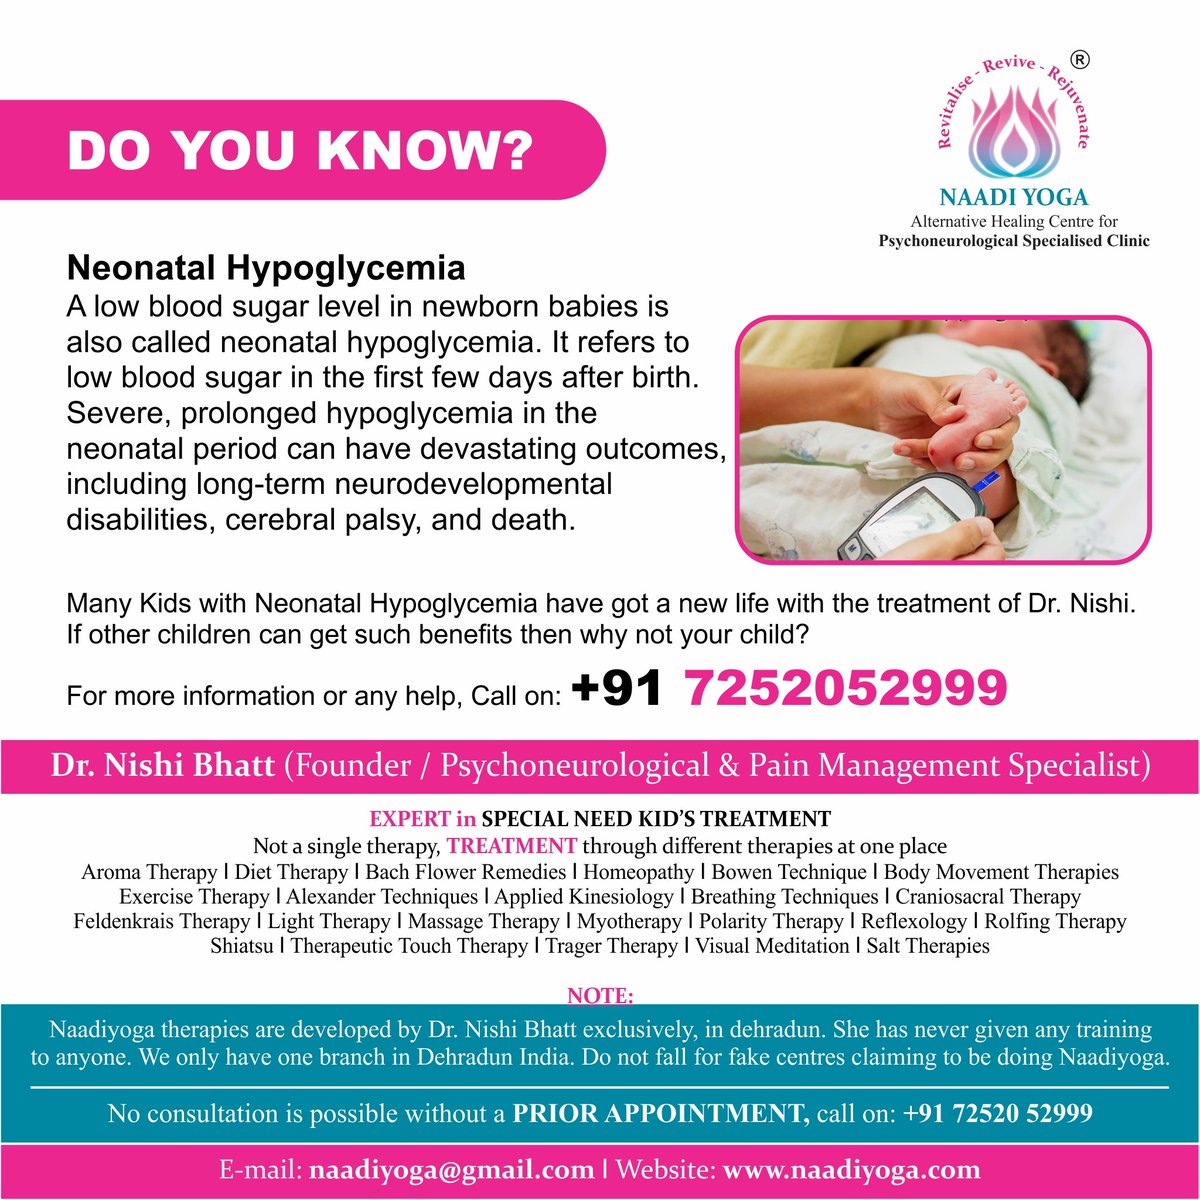 Do you know - A low blood sugar level in newborn babies is also called neonatal hypoglycemia?

If your child is also suffering with Neonatal Hypoglycemia, call on: +91 7252052999

#neonatal #hypoglycemia #epilepsy #seizure #fits #dyslexiaawareness #ADHD #ADHDAwareness #adhdbrain